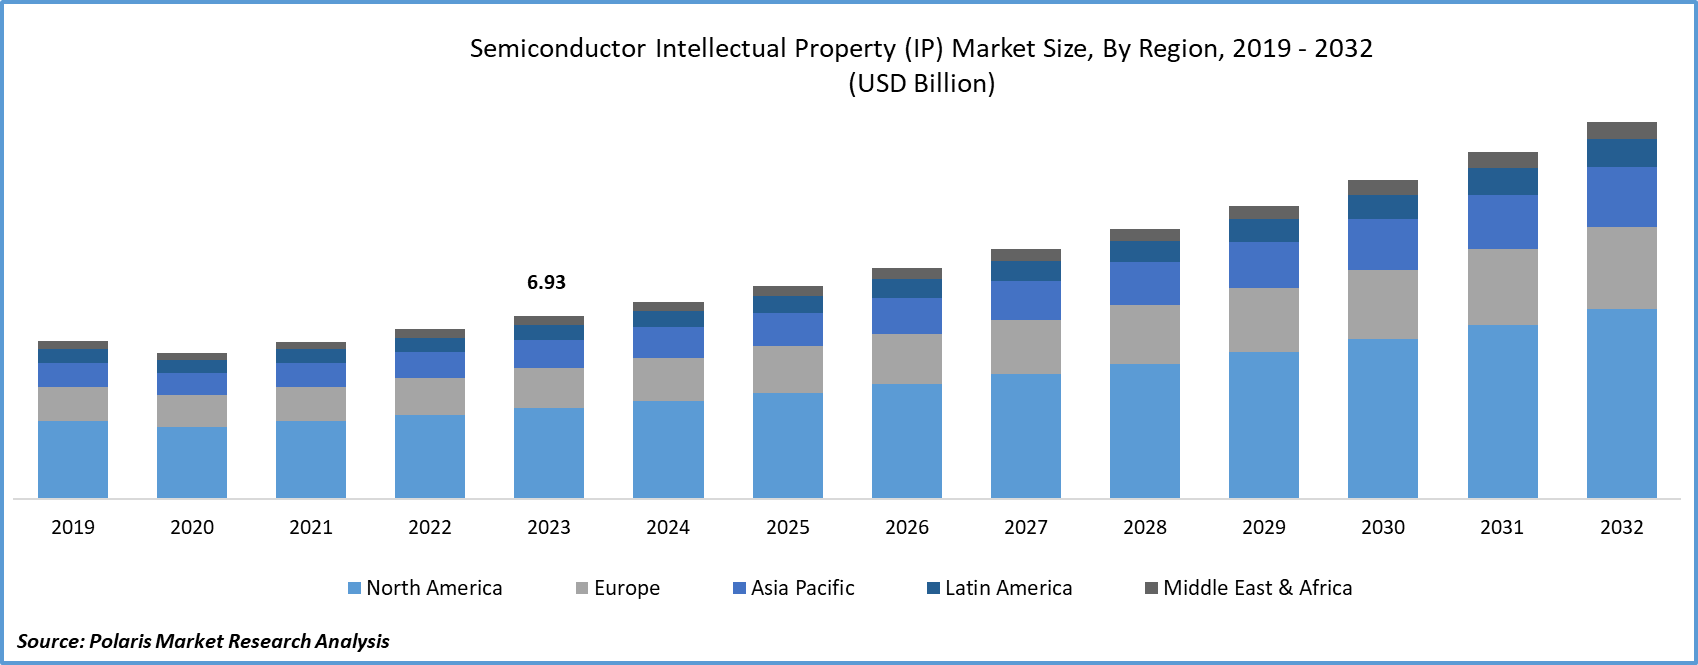 Semiconductor Intellectual Property (IP) Market Size